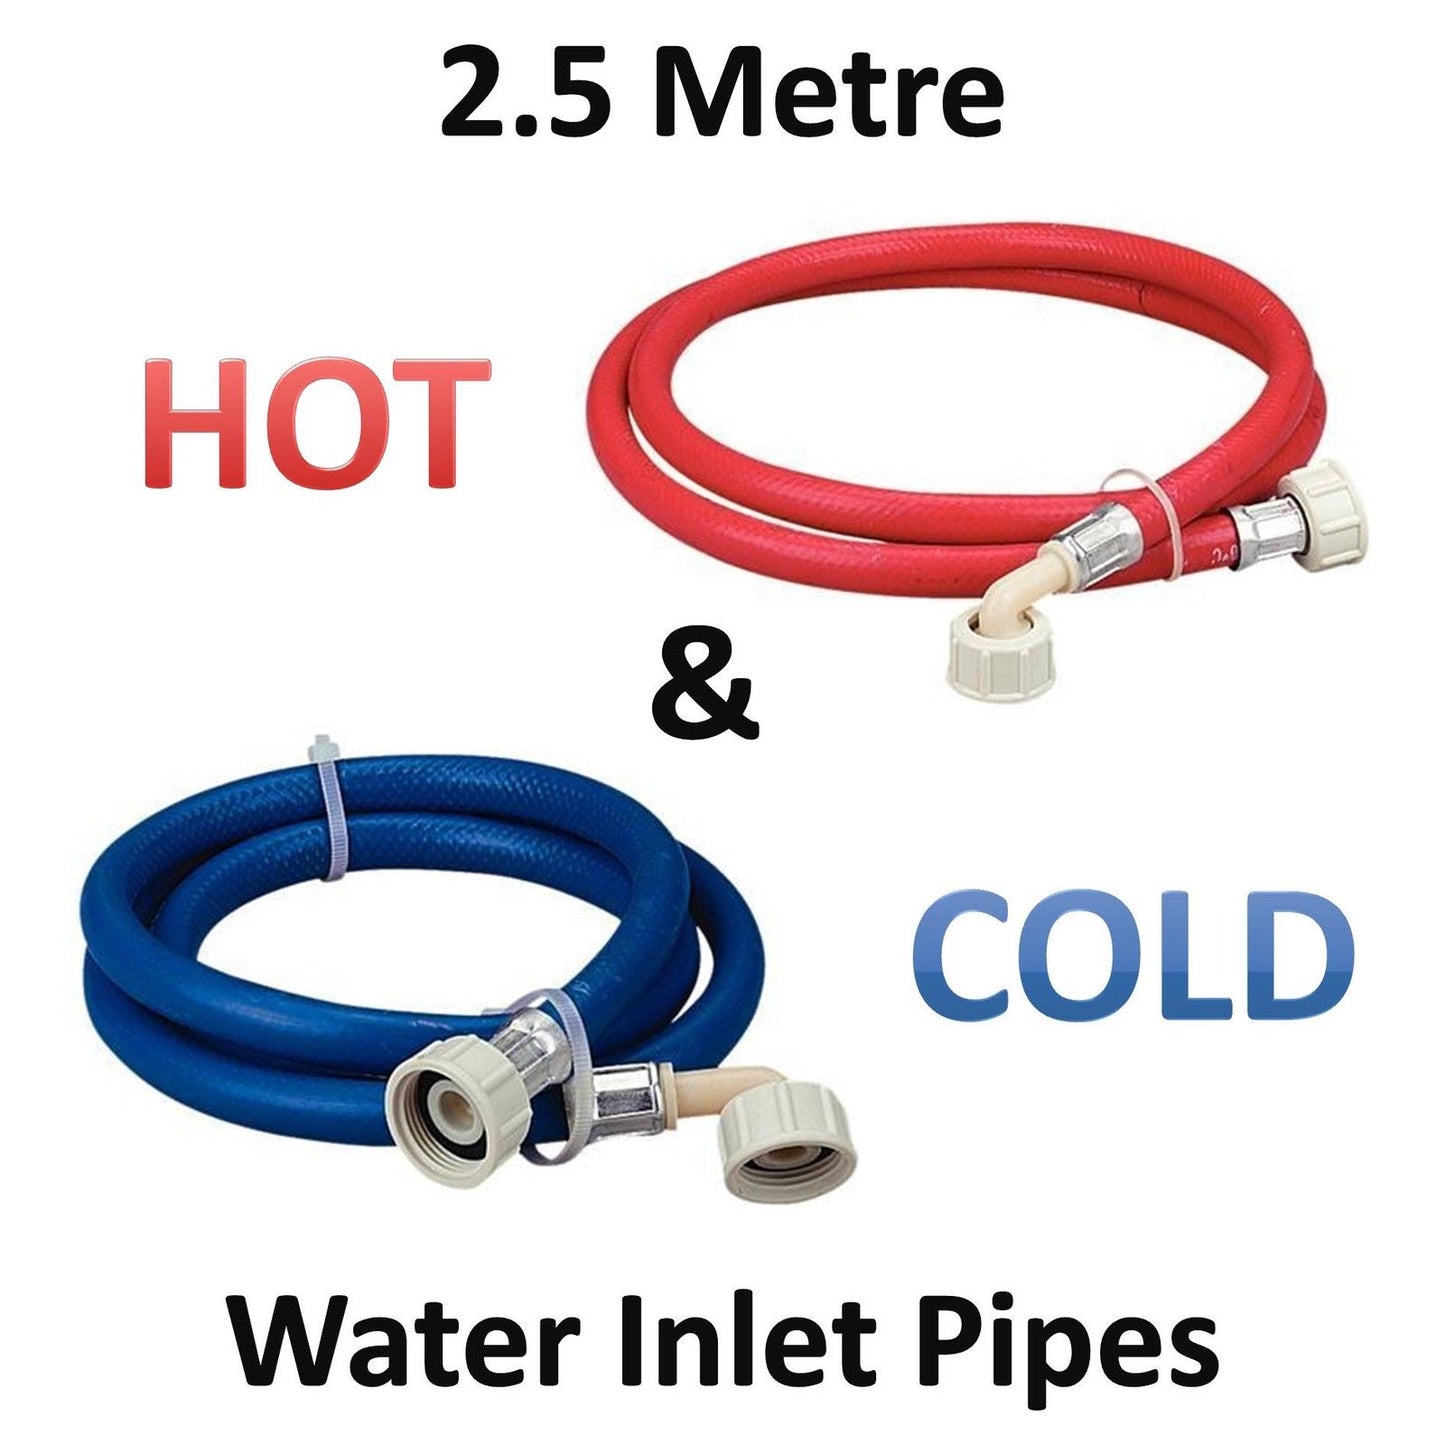 2.5m Long Washing Machine Hose Pipes Inlet Water Fill Hose 1 BLUE 1 RED Cold Hot